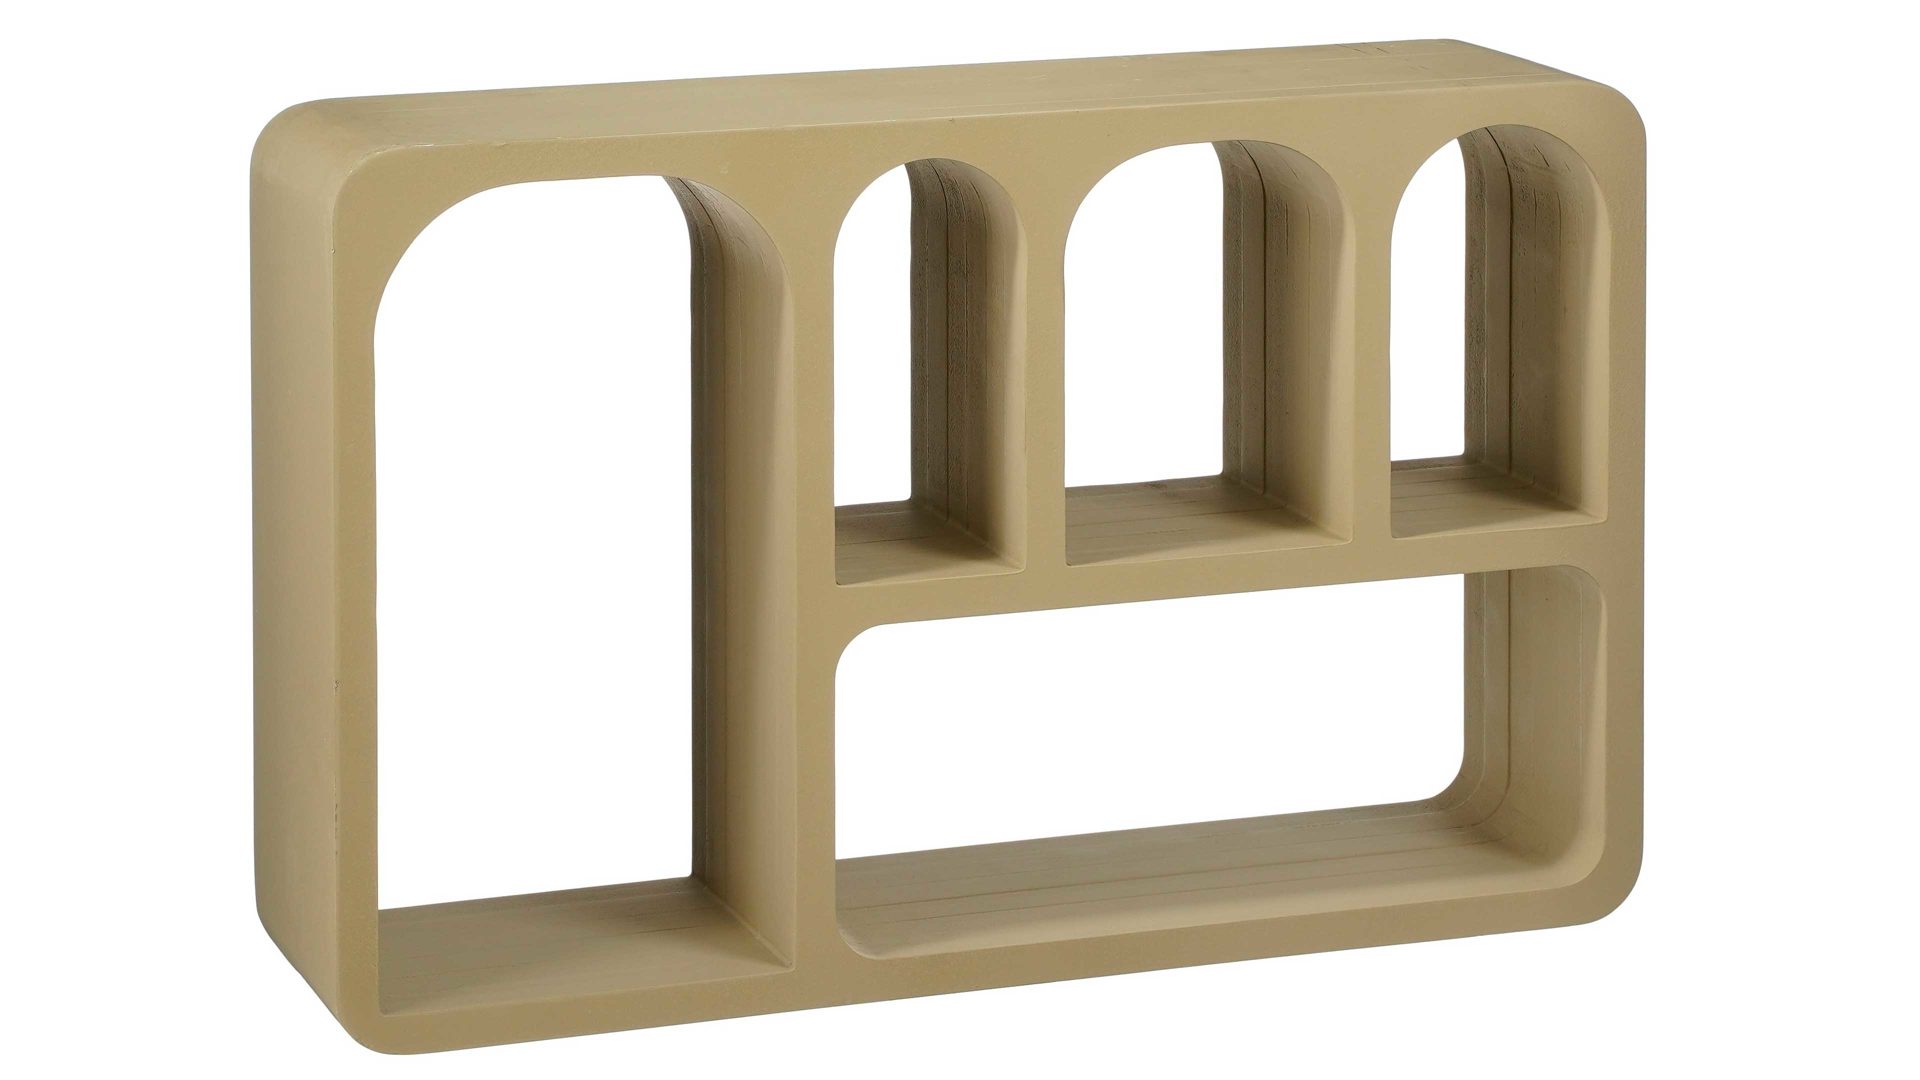 Wandregal Interliving BEST BUDDYS! aus Holz in Beige Interliving BEST BUDDYS! Wandregal Frati taupefarbenes MDF - ca. 60 x 38 cm